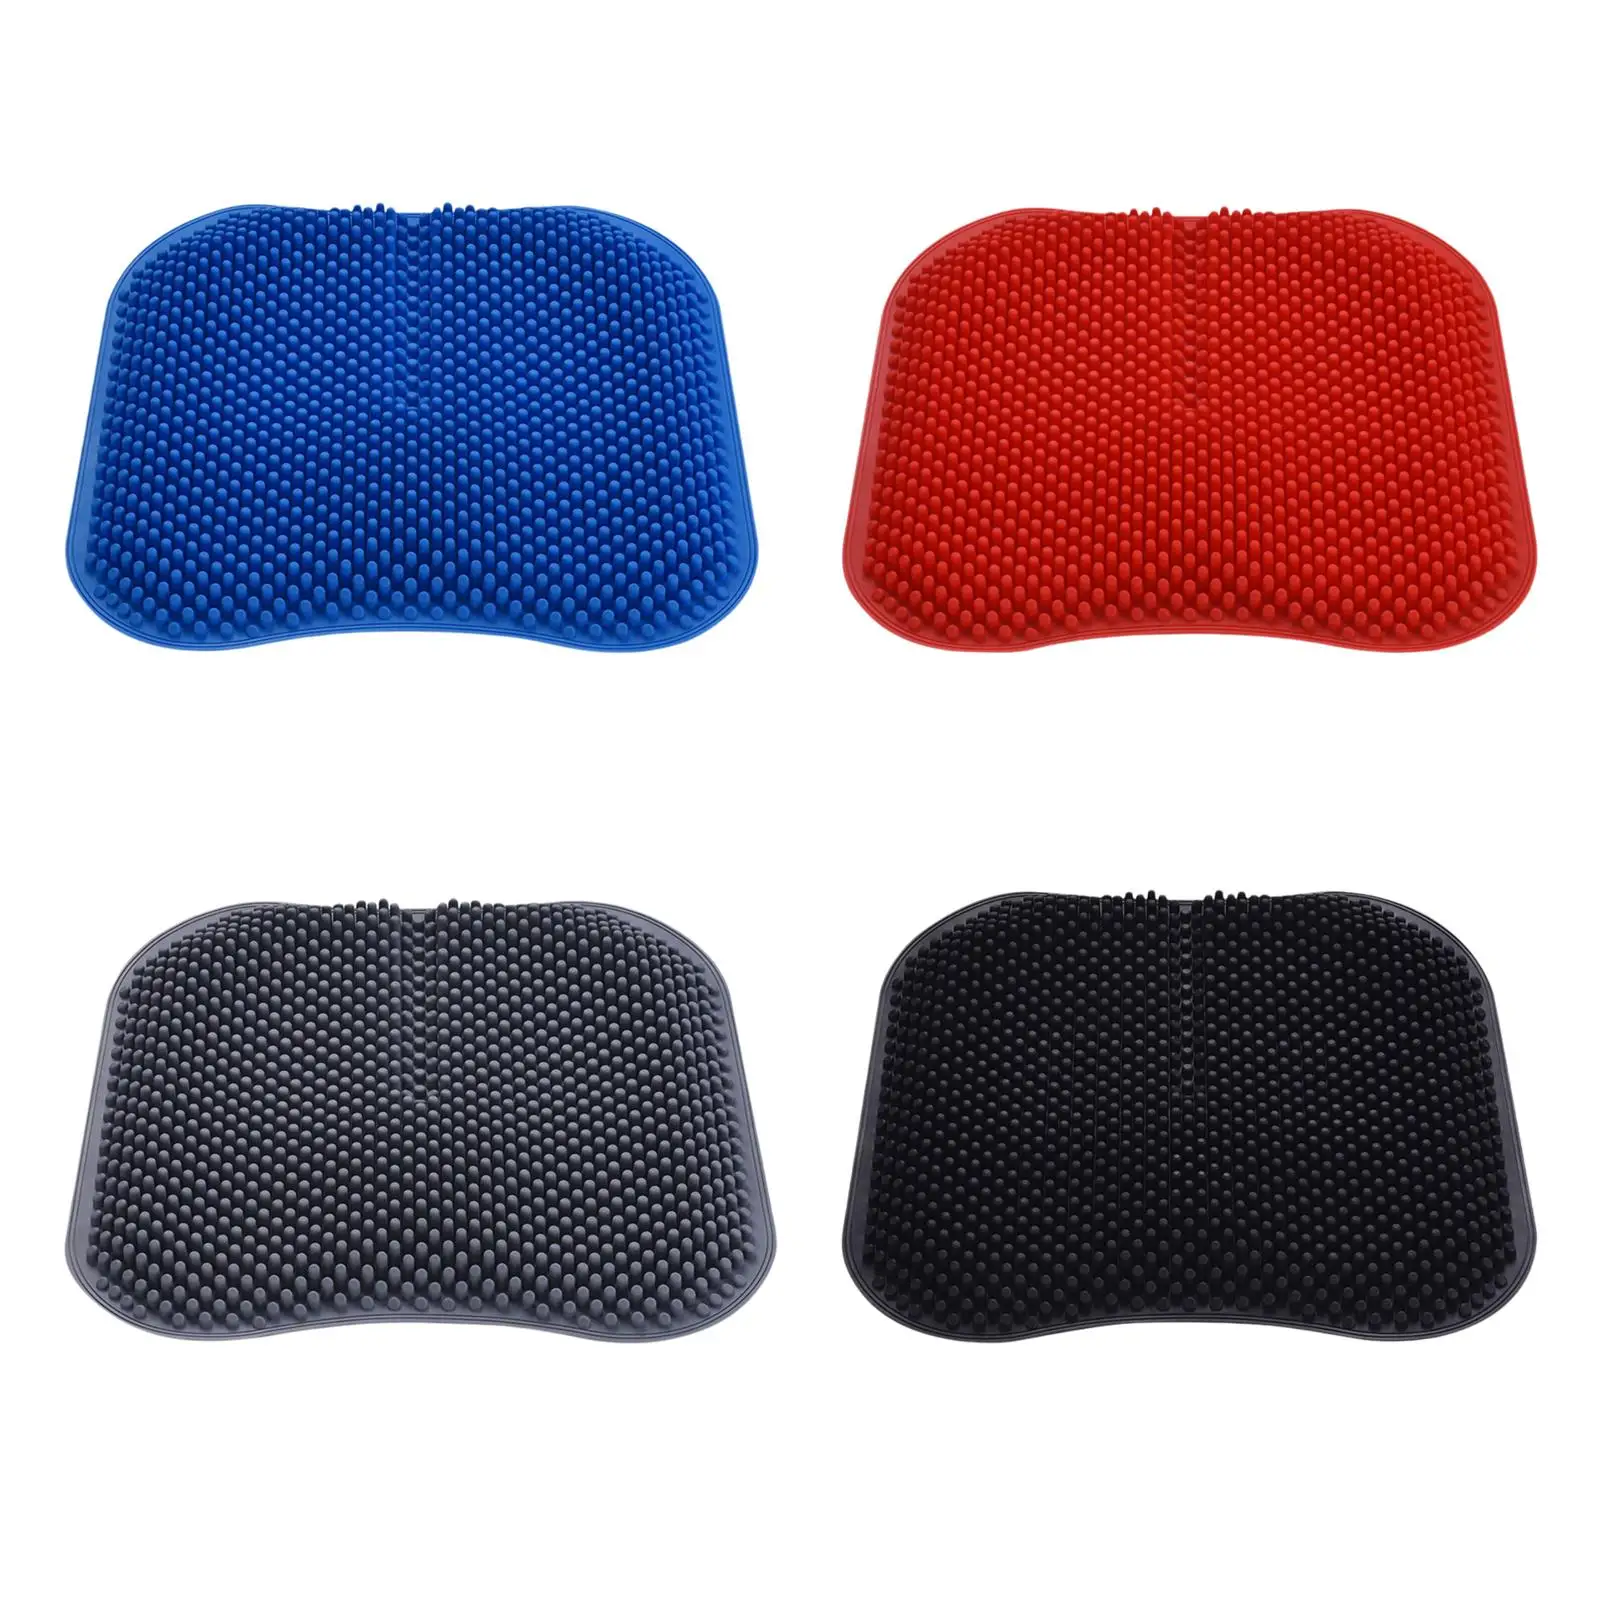 Silicone Car Seat Cushion Non Slip Chair Pad Seat Pad Breathable Seat Cover 16.5 inch Waterproof for Car Home Office Chair